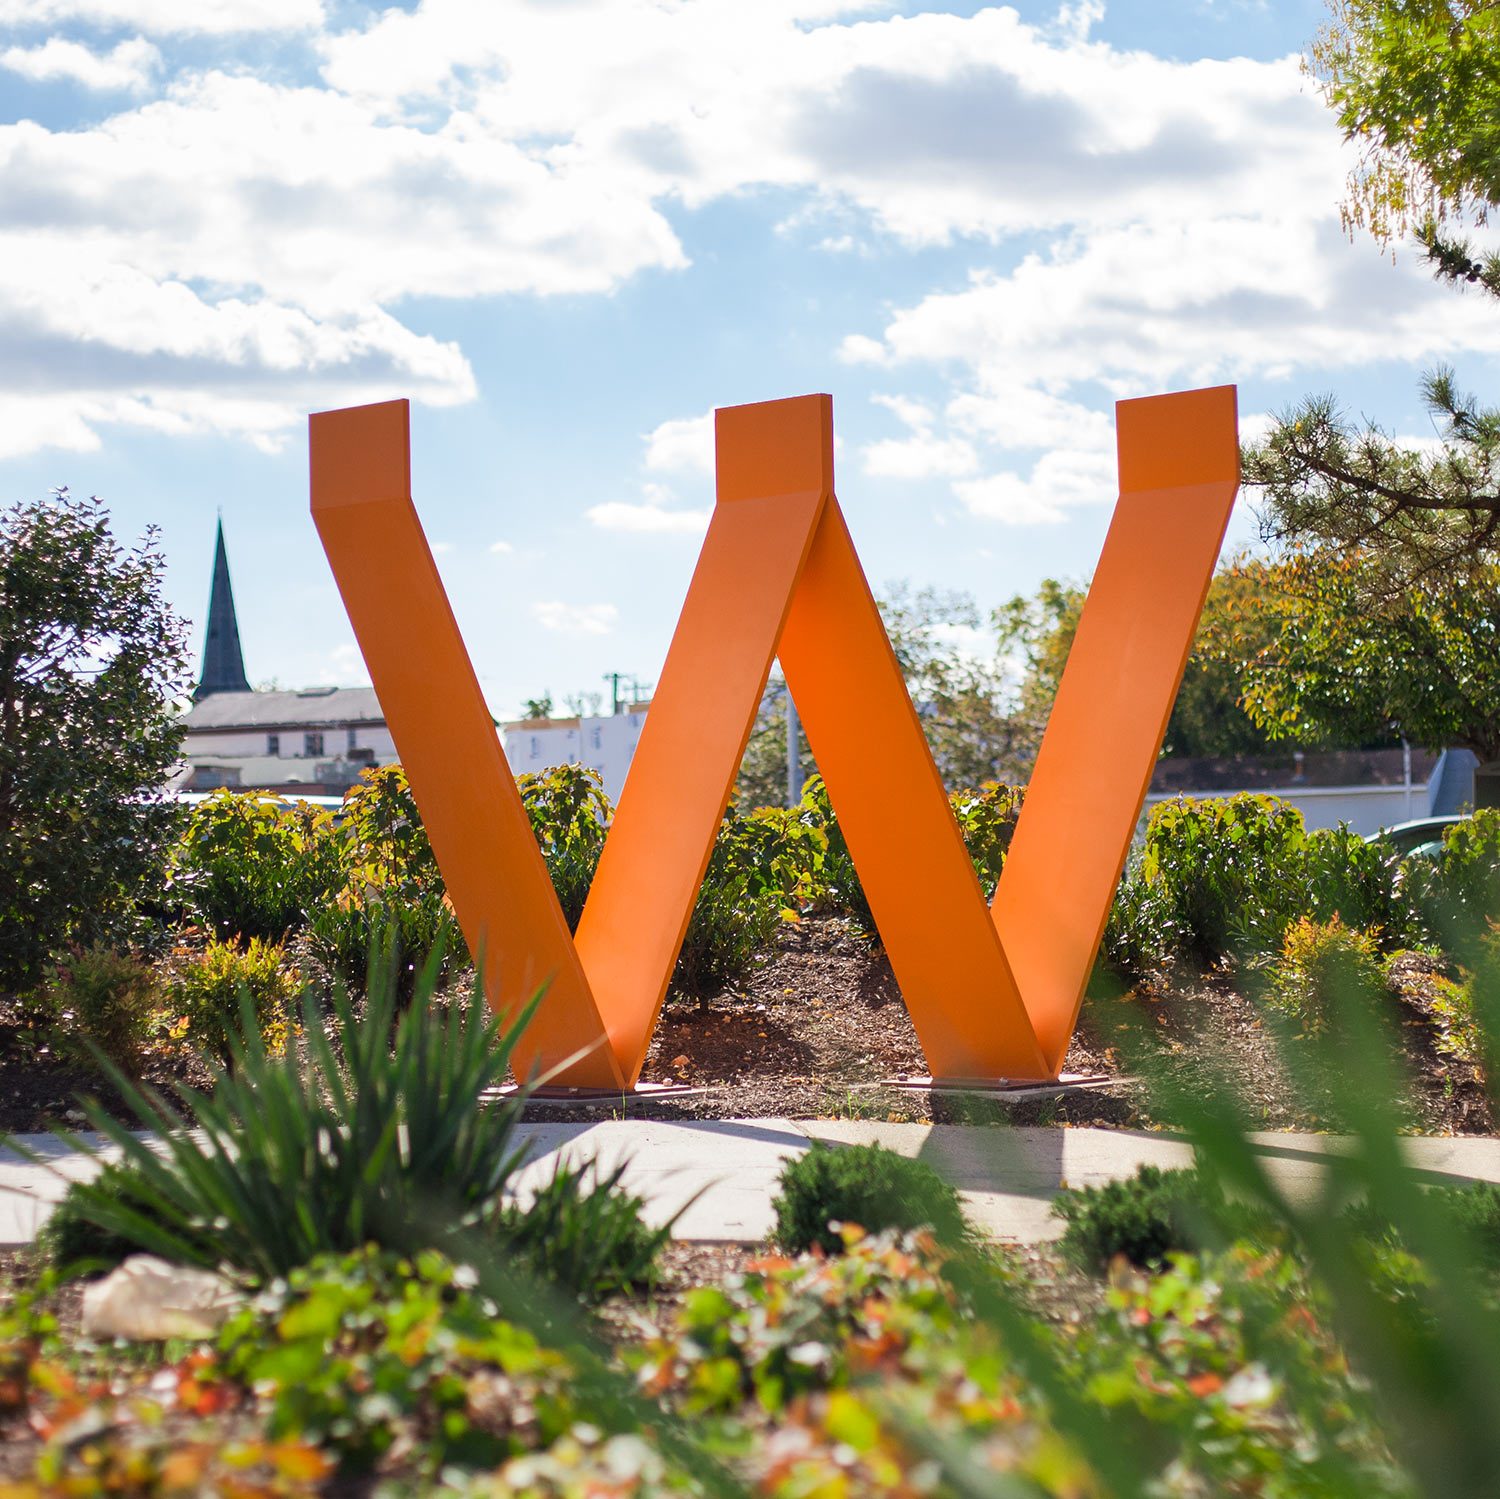 'W' sculpture surrounded by plants